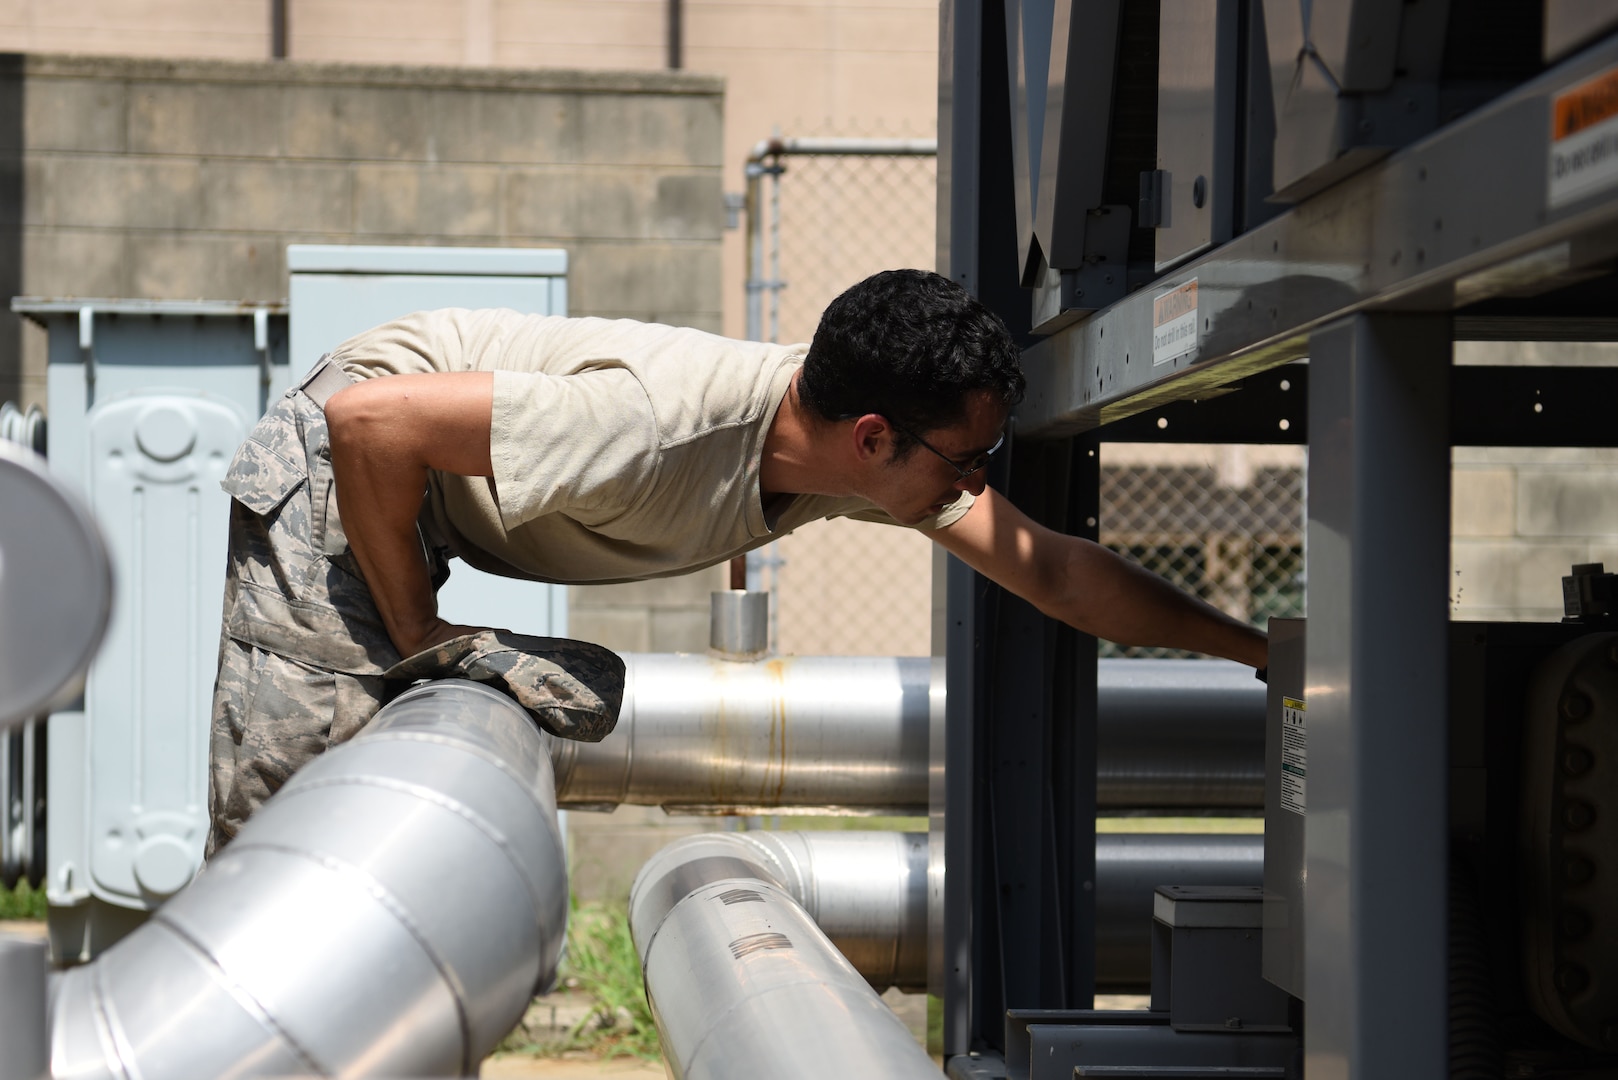 U.S. Air Force Senior Airman Frank Galambos, 51st Civil Engineer Squadron heating, ventilating and air conditioning journeyman, checks a cooling unit for one of the dorms at Osan Air Base, Republic of Korea, Aug. 13, 2018. With 42 members – 24 military and 18 civilian – assigned to the HVAC flight, they were able to close approximately 1,500 work orders in three months. (U.S. Air Force photo by Senior Airman Kelsey Tucker)